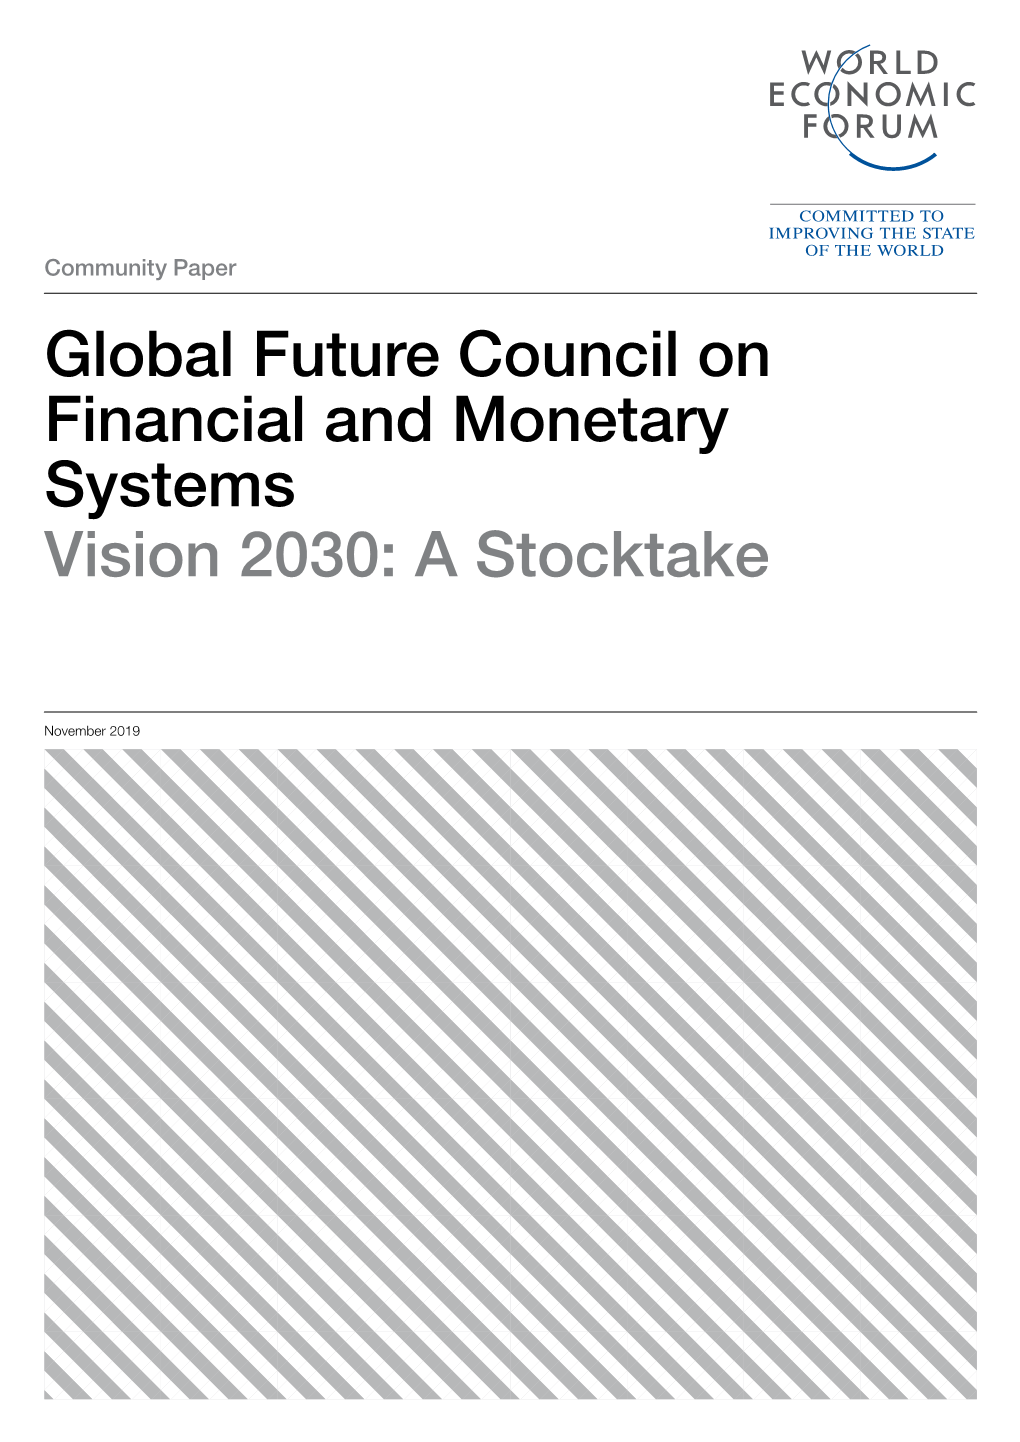 Global Future Council on Financial and Monetary Systems Vision 2030: a Stocktake